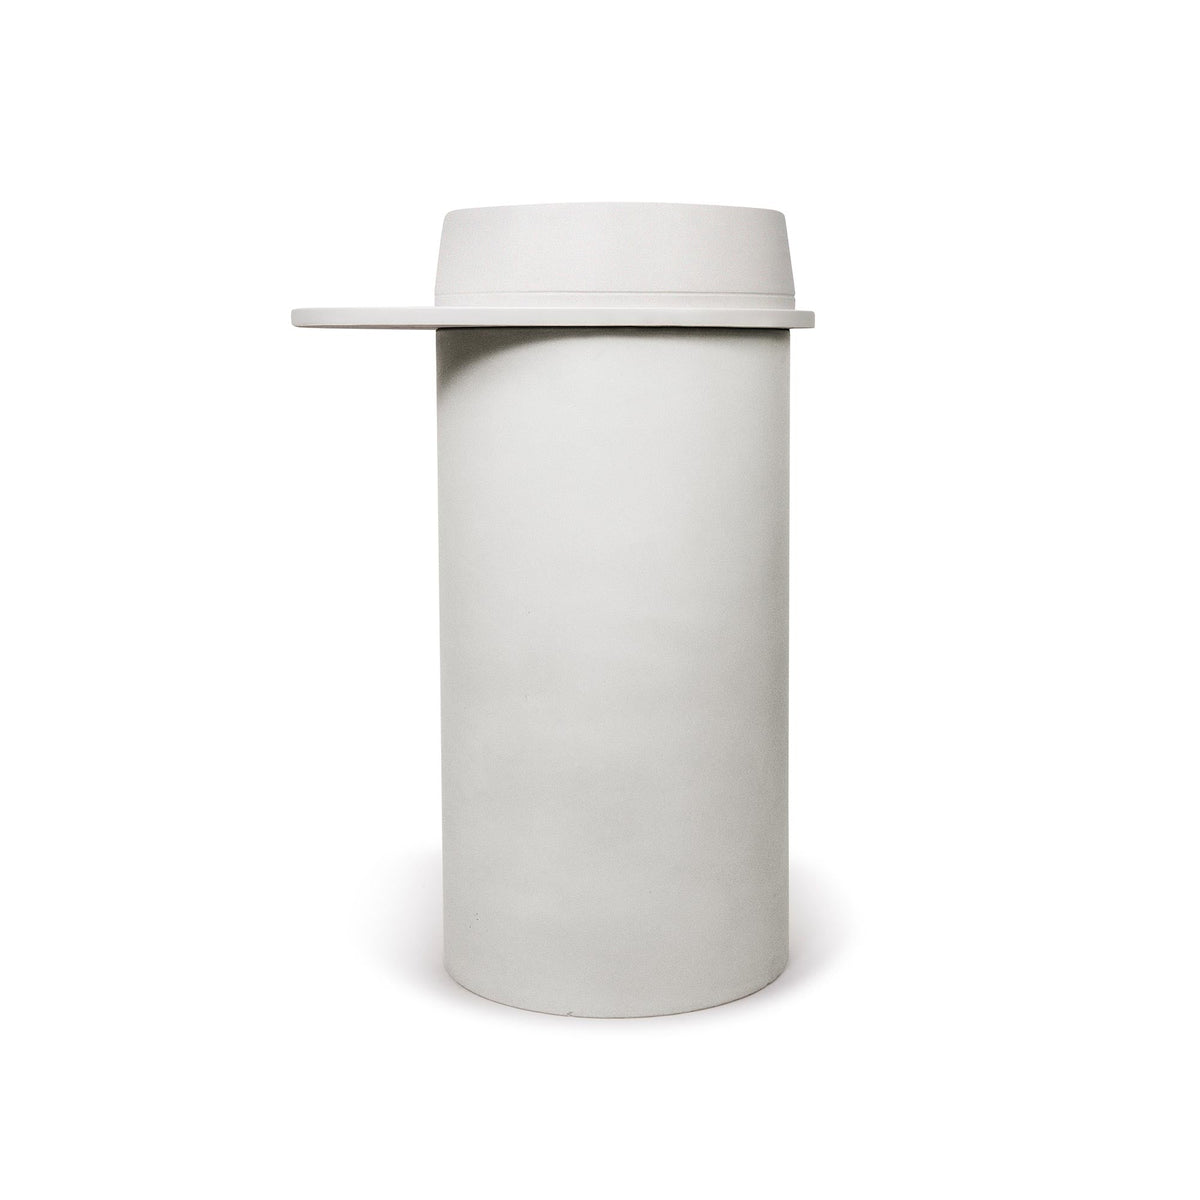 Cylinder with Tray - Funl Basin (Clay,Musk)